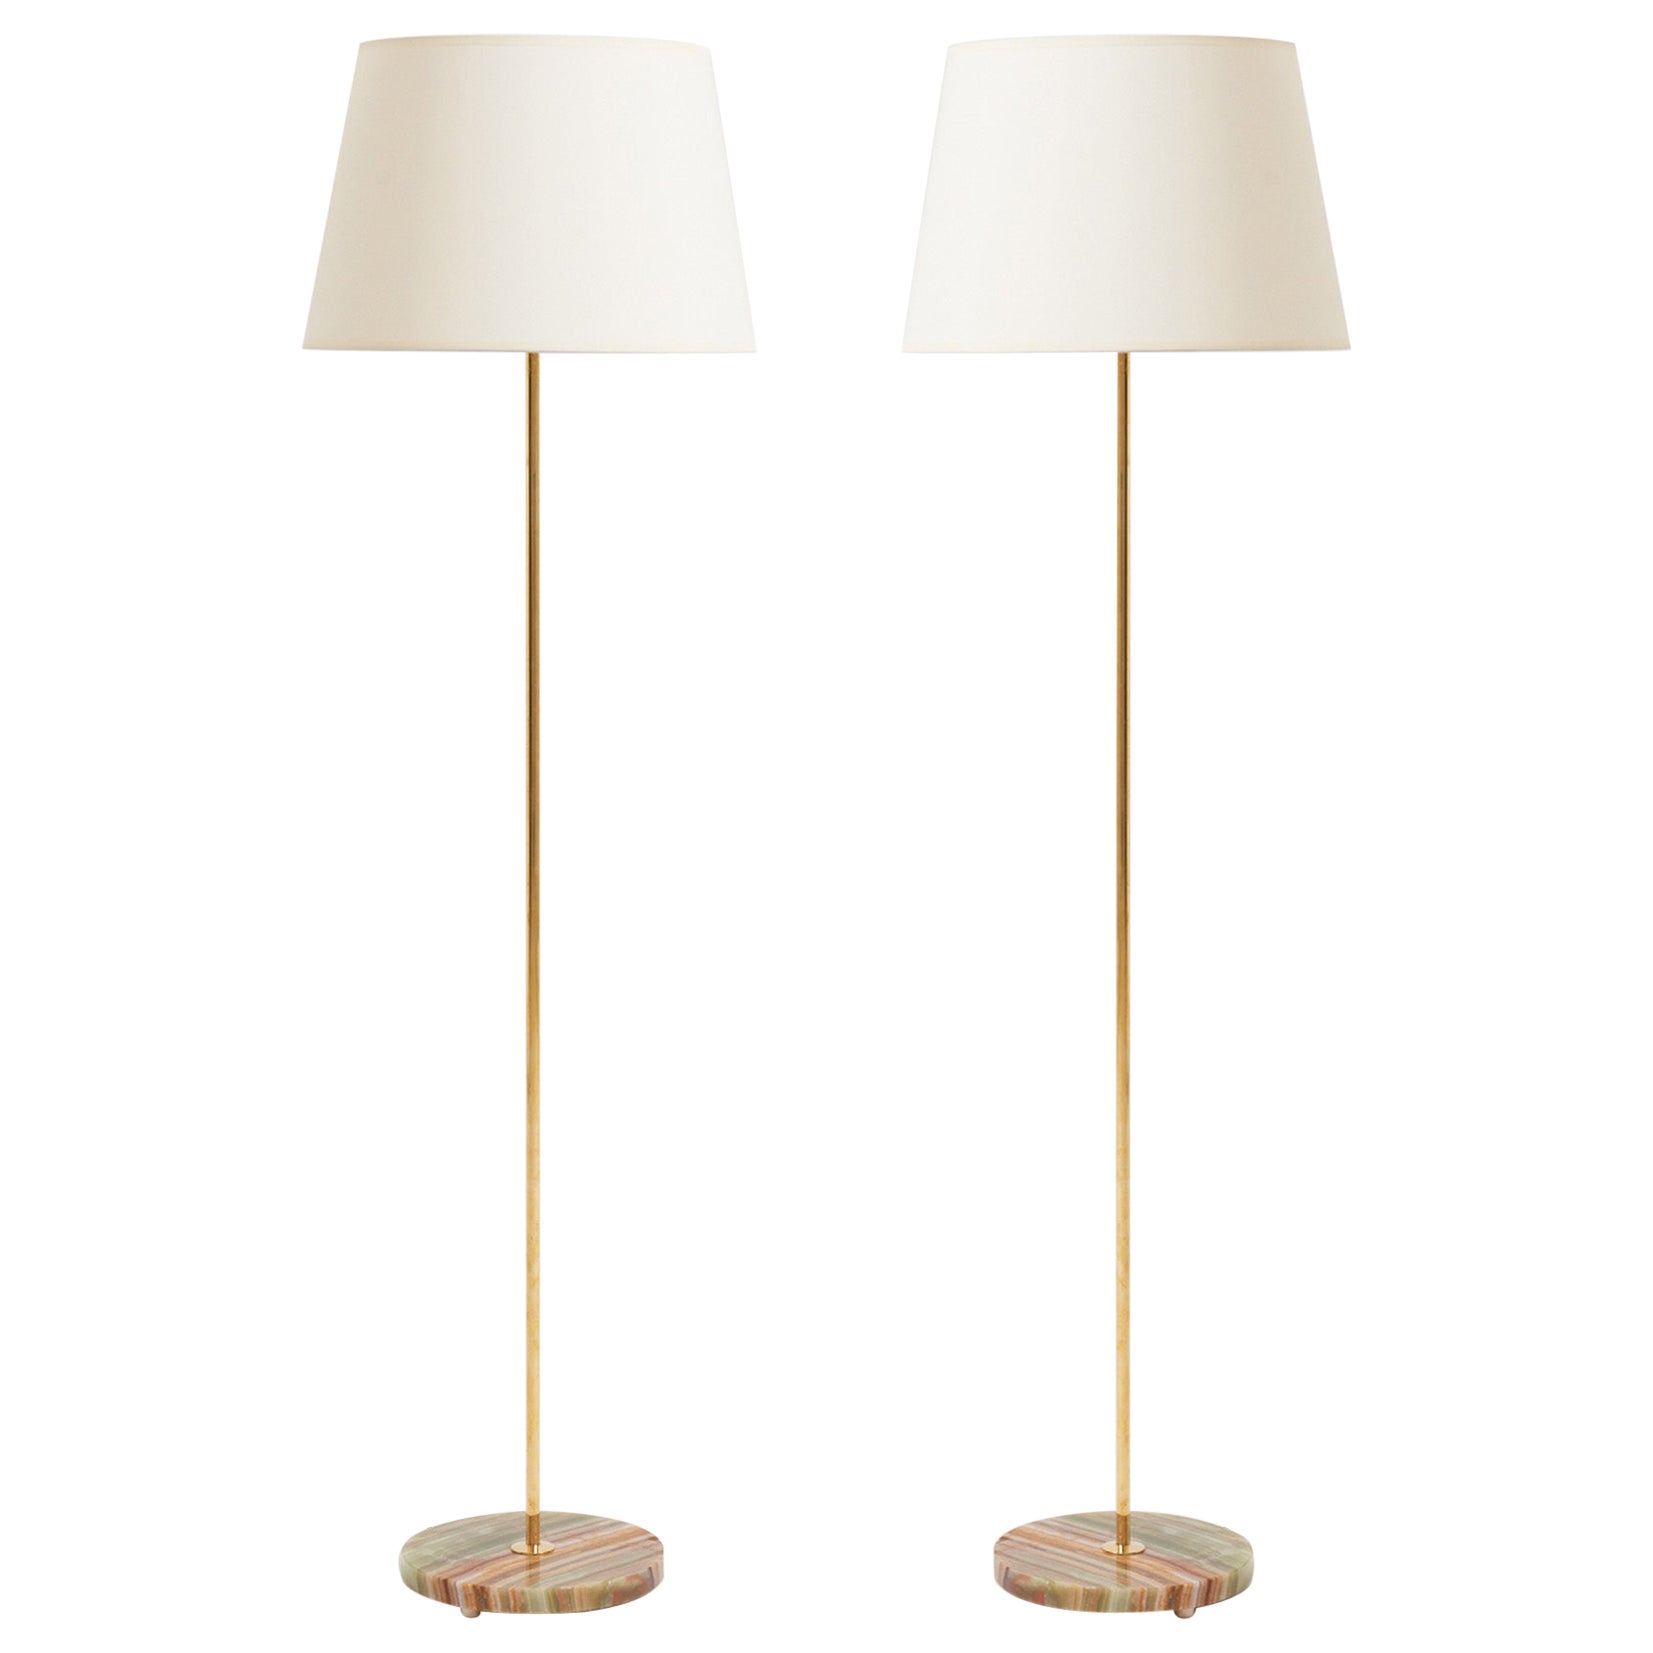 Pair of Brass and Onyx Floor Lamps